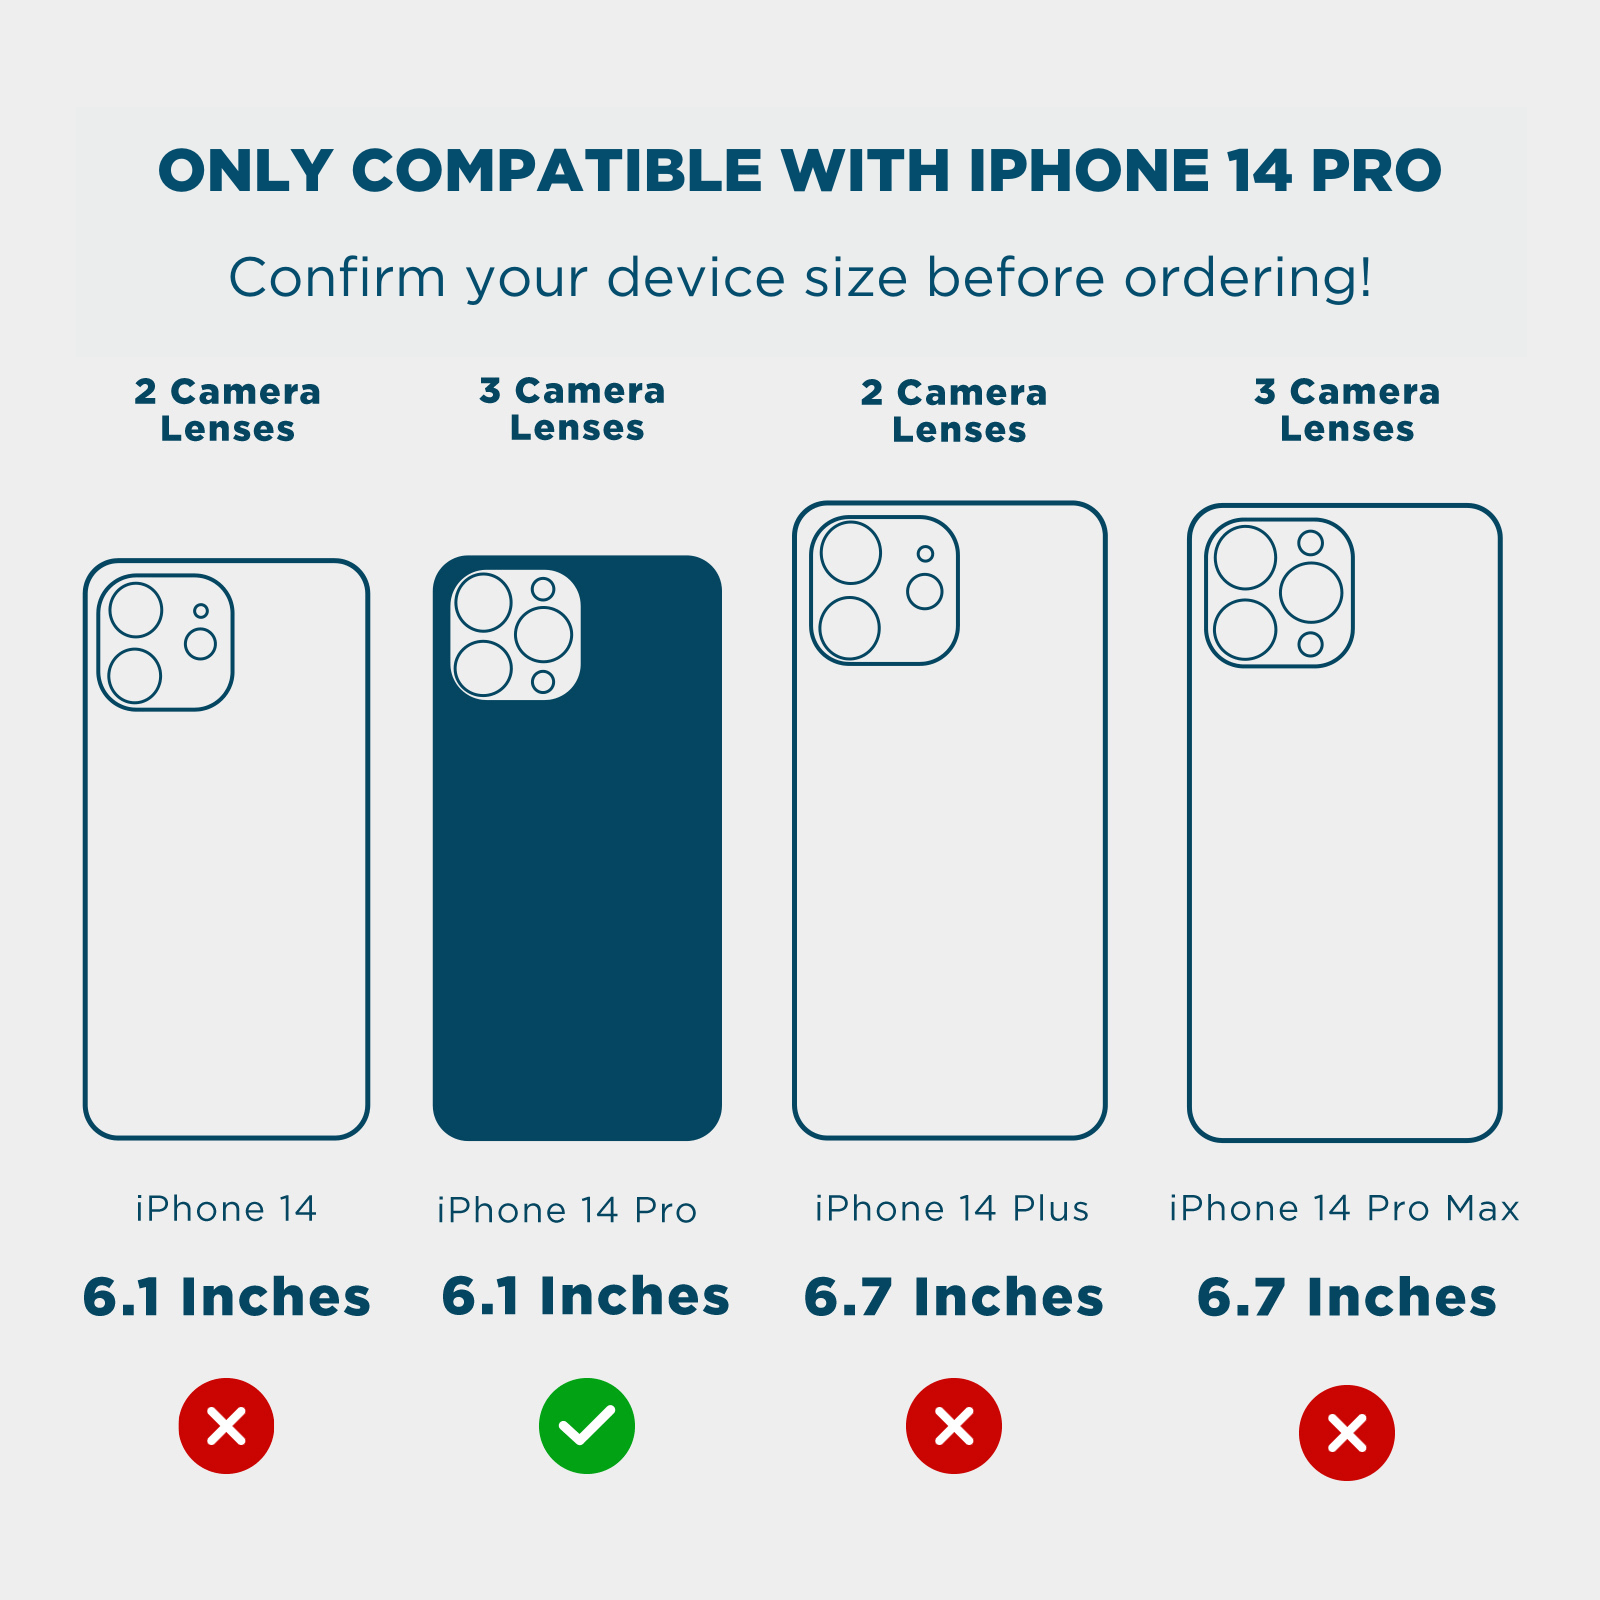 ONLY COMPATIBLE WITH IPHONE 14 PRO. CONFIRM YOUR DEVICE SIZE BEFORE ORDERING. 2 CAMERA LENSES, 3 CAMERA LENSES, 2 CAMERA LENSES, 3 CAMERA LENSES, 6.1, 6.1, 6.7, 6.7. COLOR::CLAY PINK